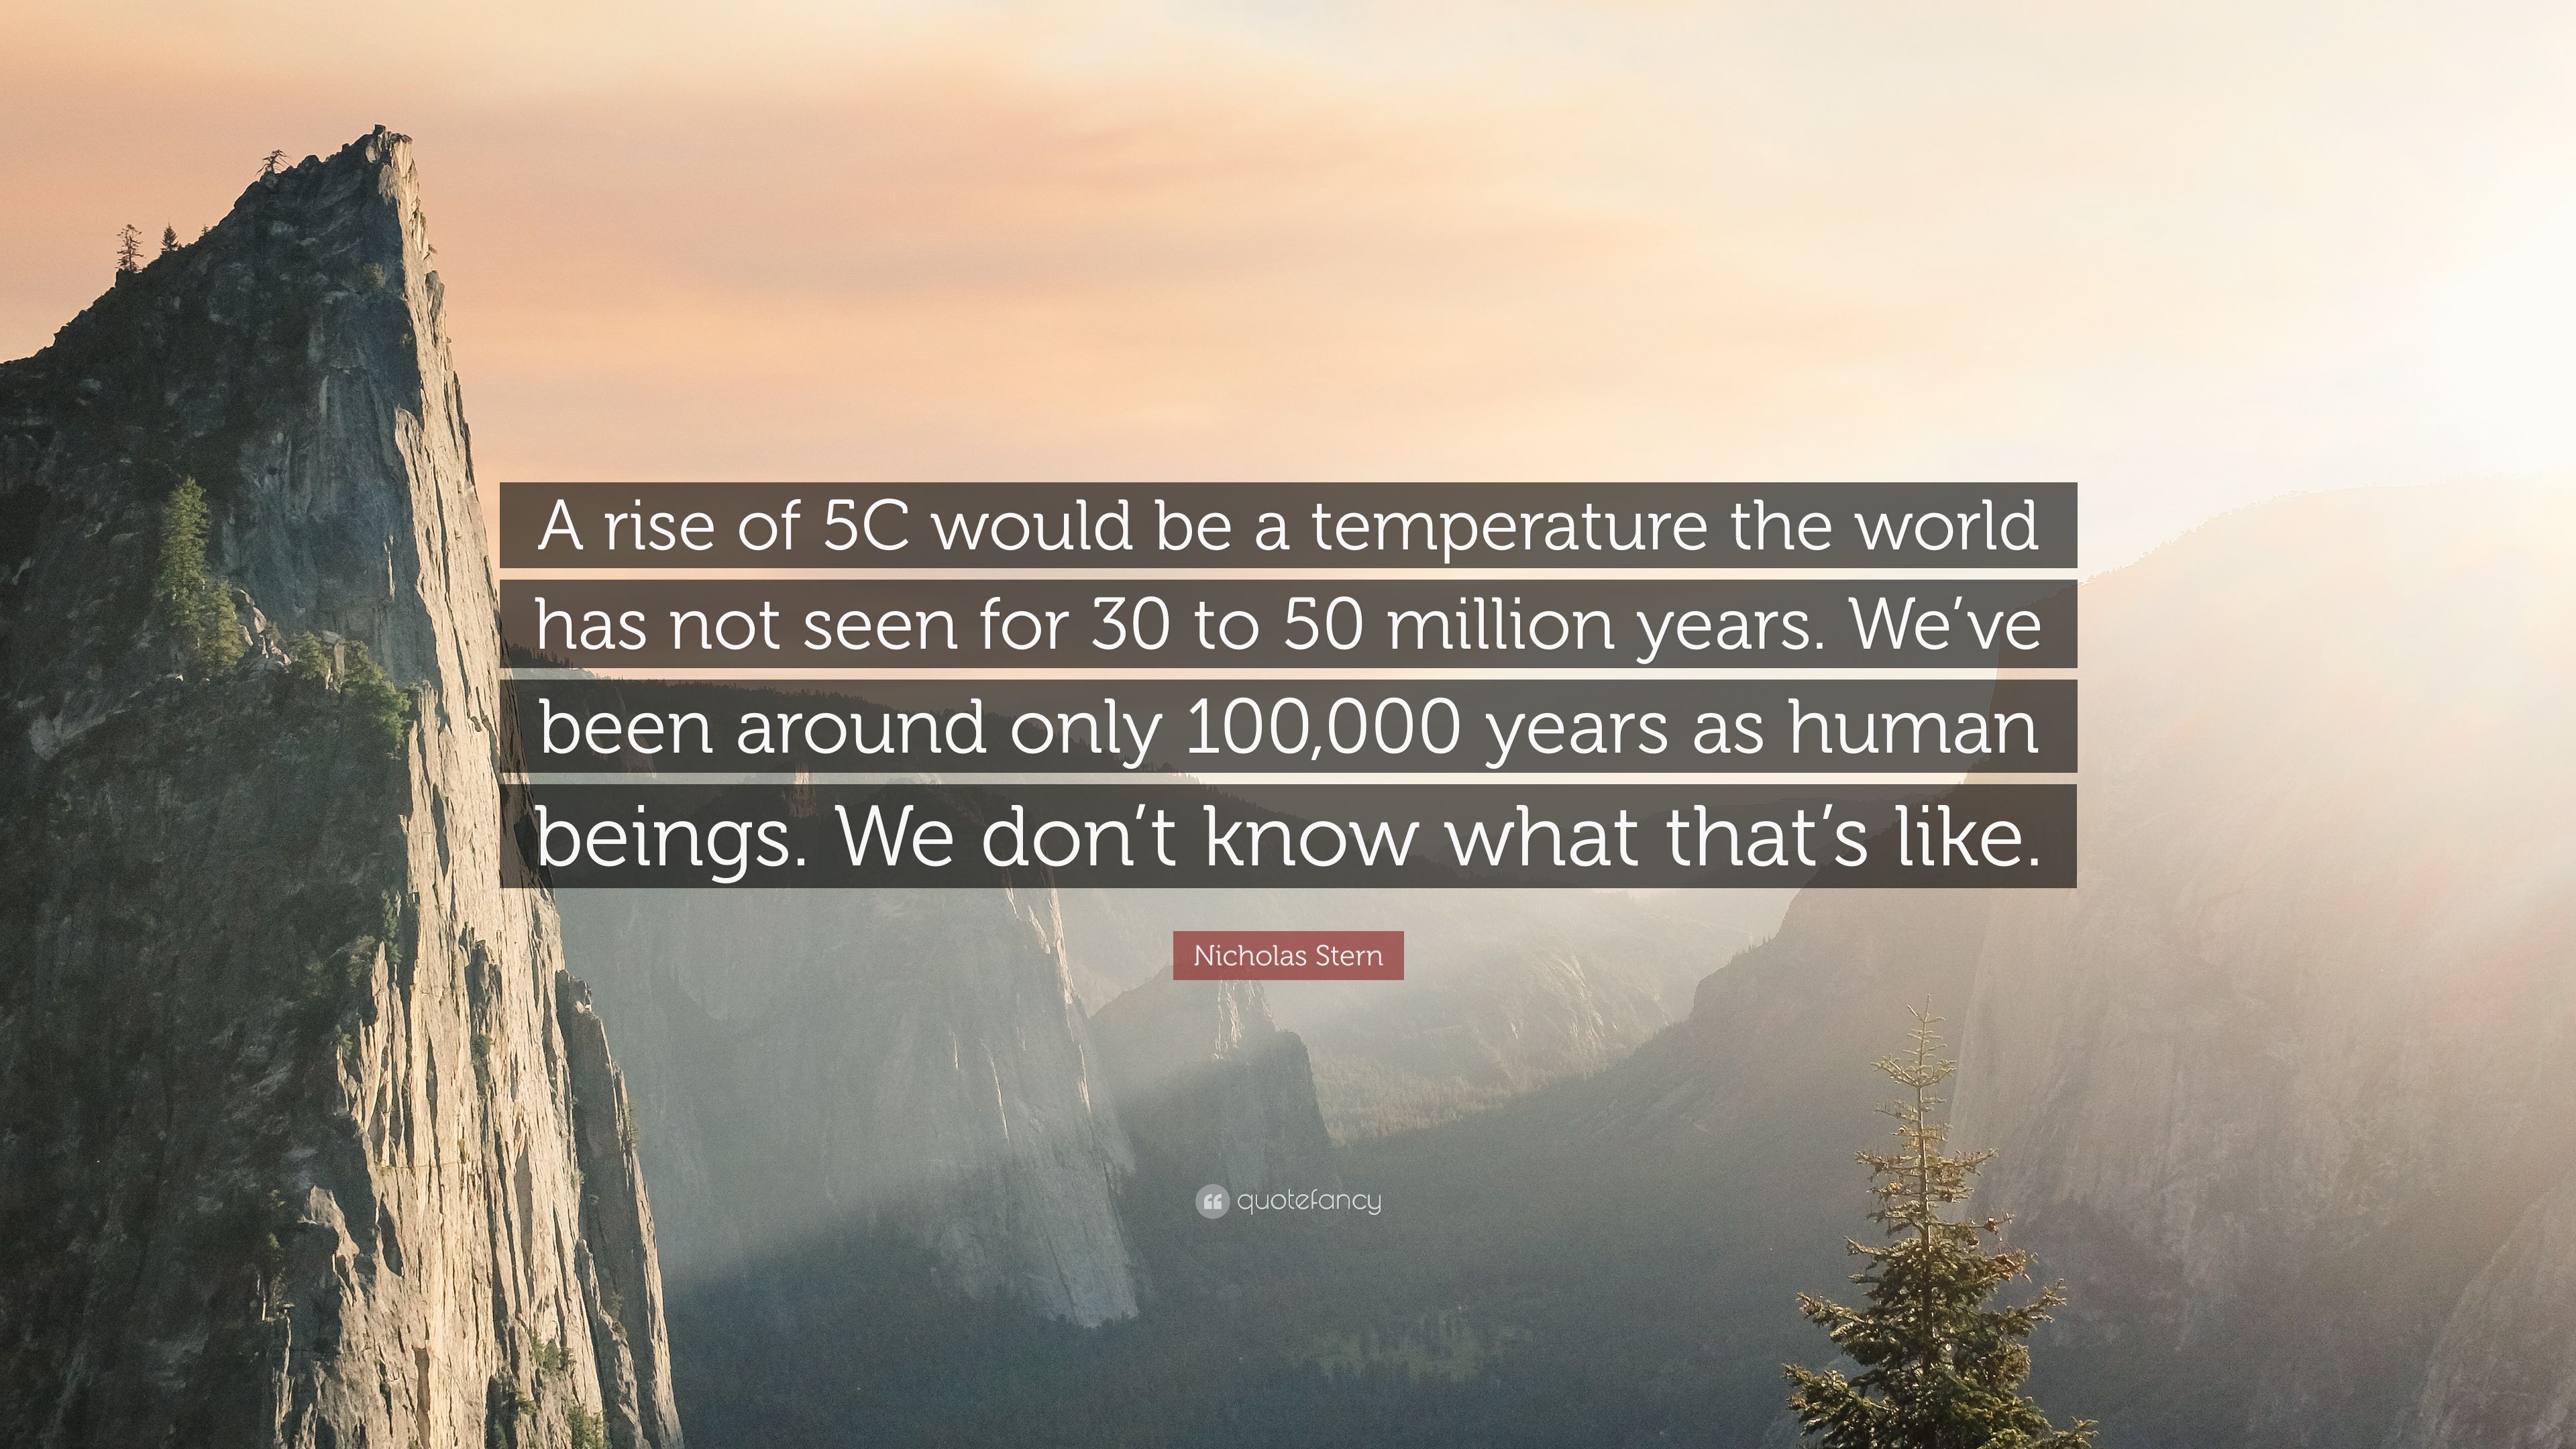 Nicholas Stern Quote: “A rise of 5C would be a temperature